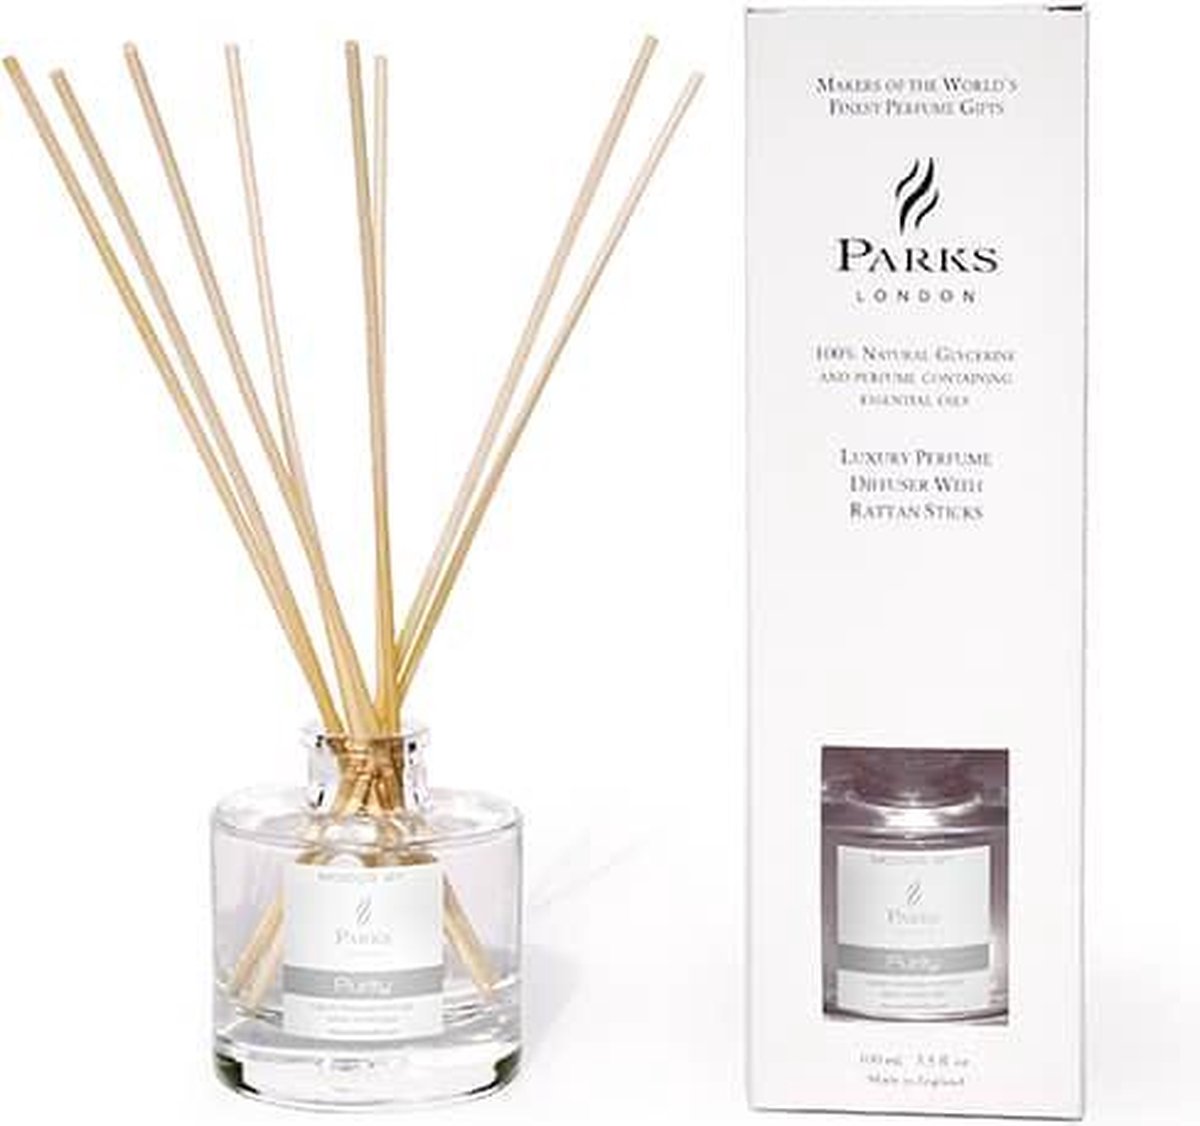 Parks London - MOODS - Purity (White) - Hibiscus, Lotus Flowers, Orchids & Gardenia - 100ml